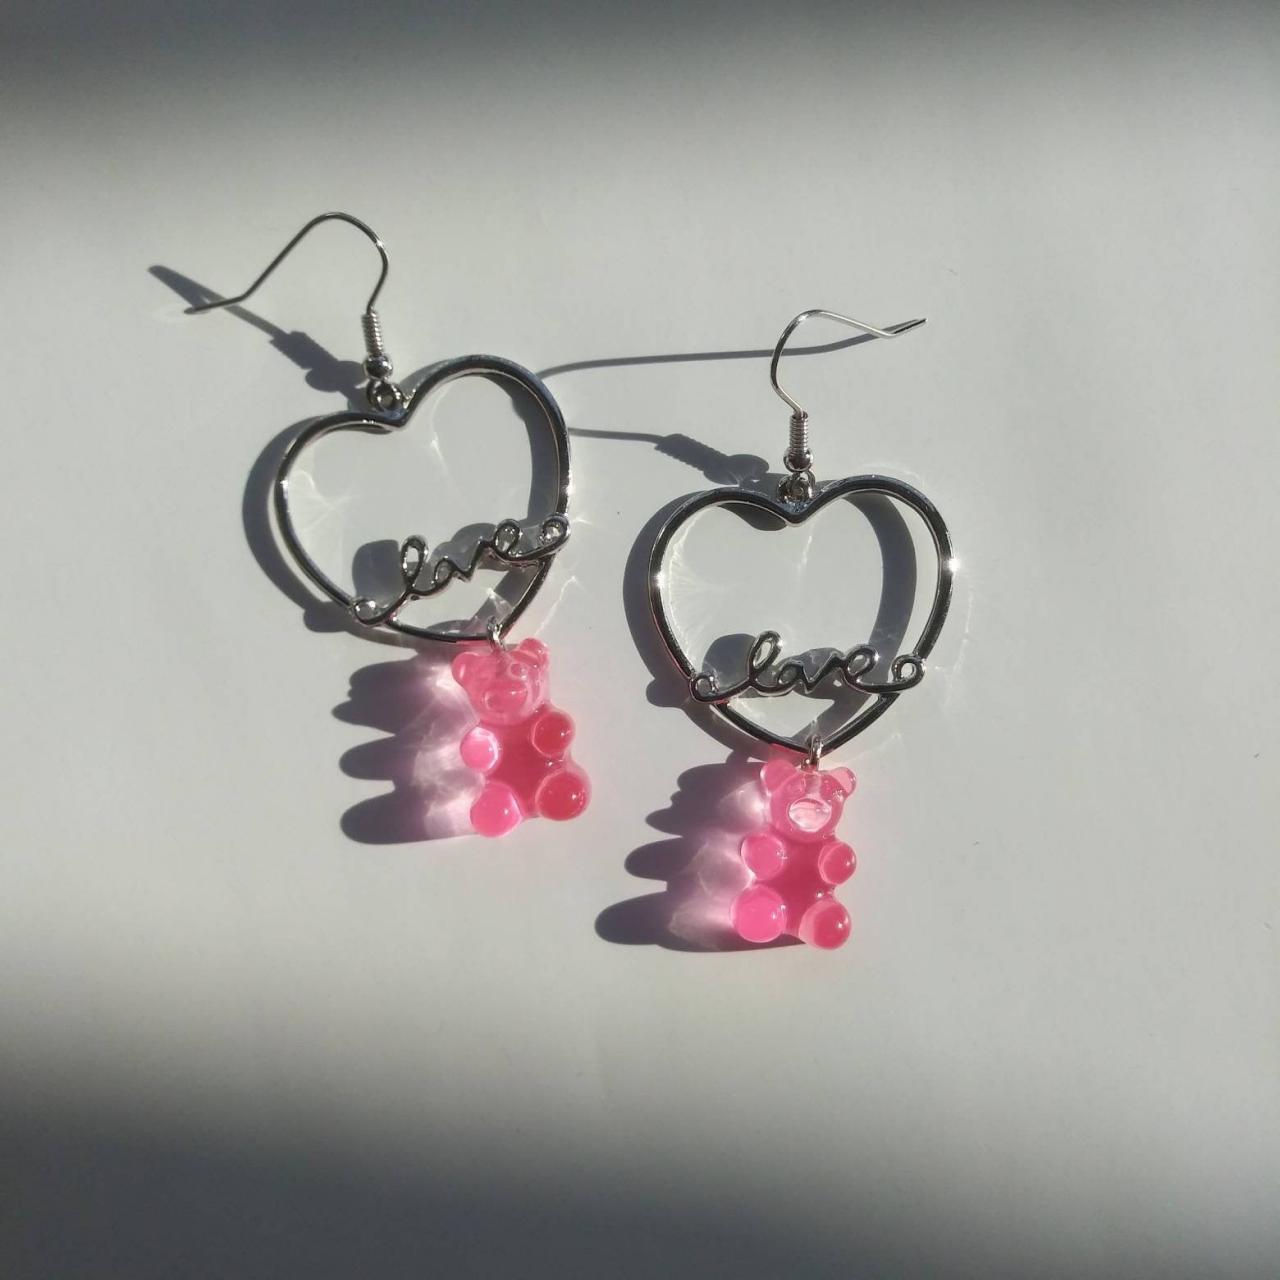 Available In 6 Colour Gummy Bear With Love Heart Drop Earrings, Multi-colour Gummy Bear Earrings